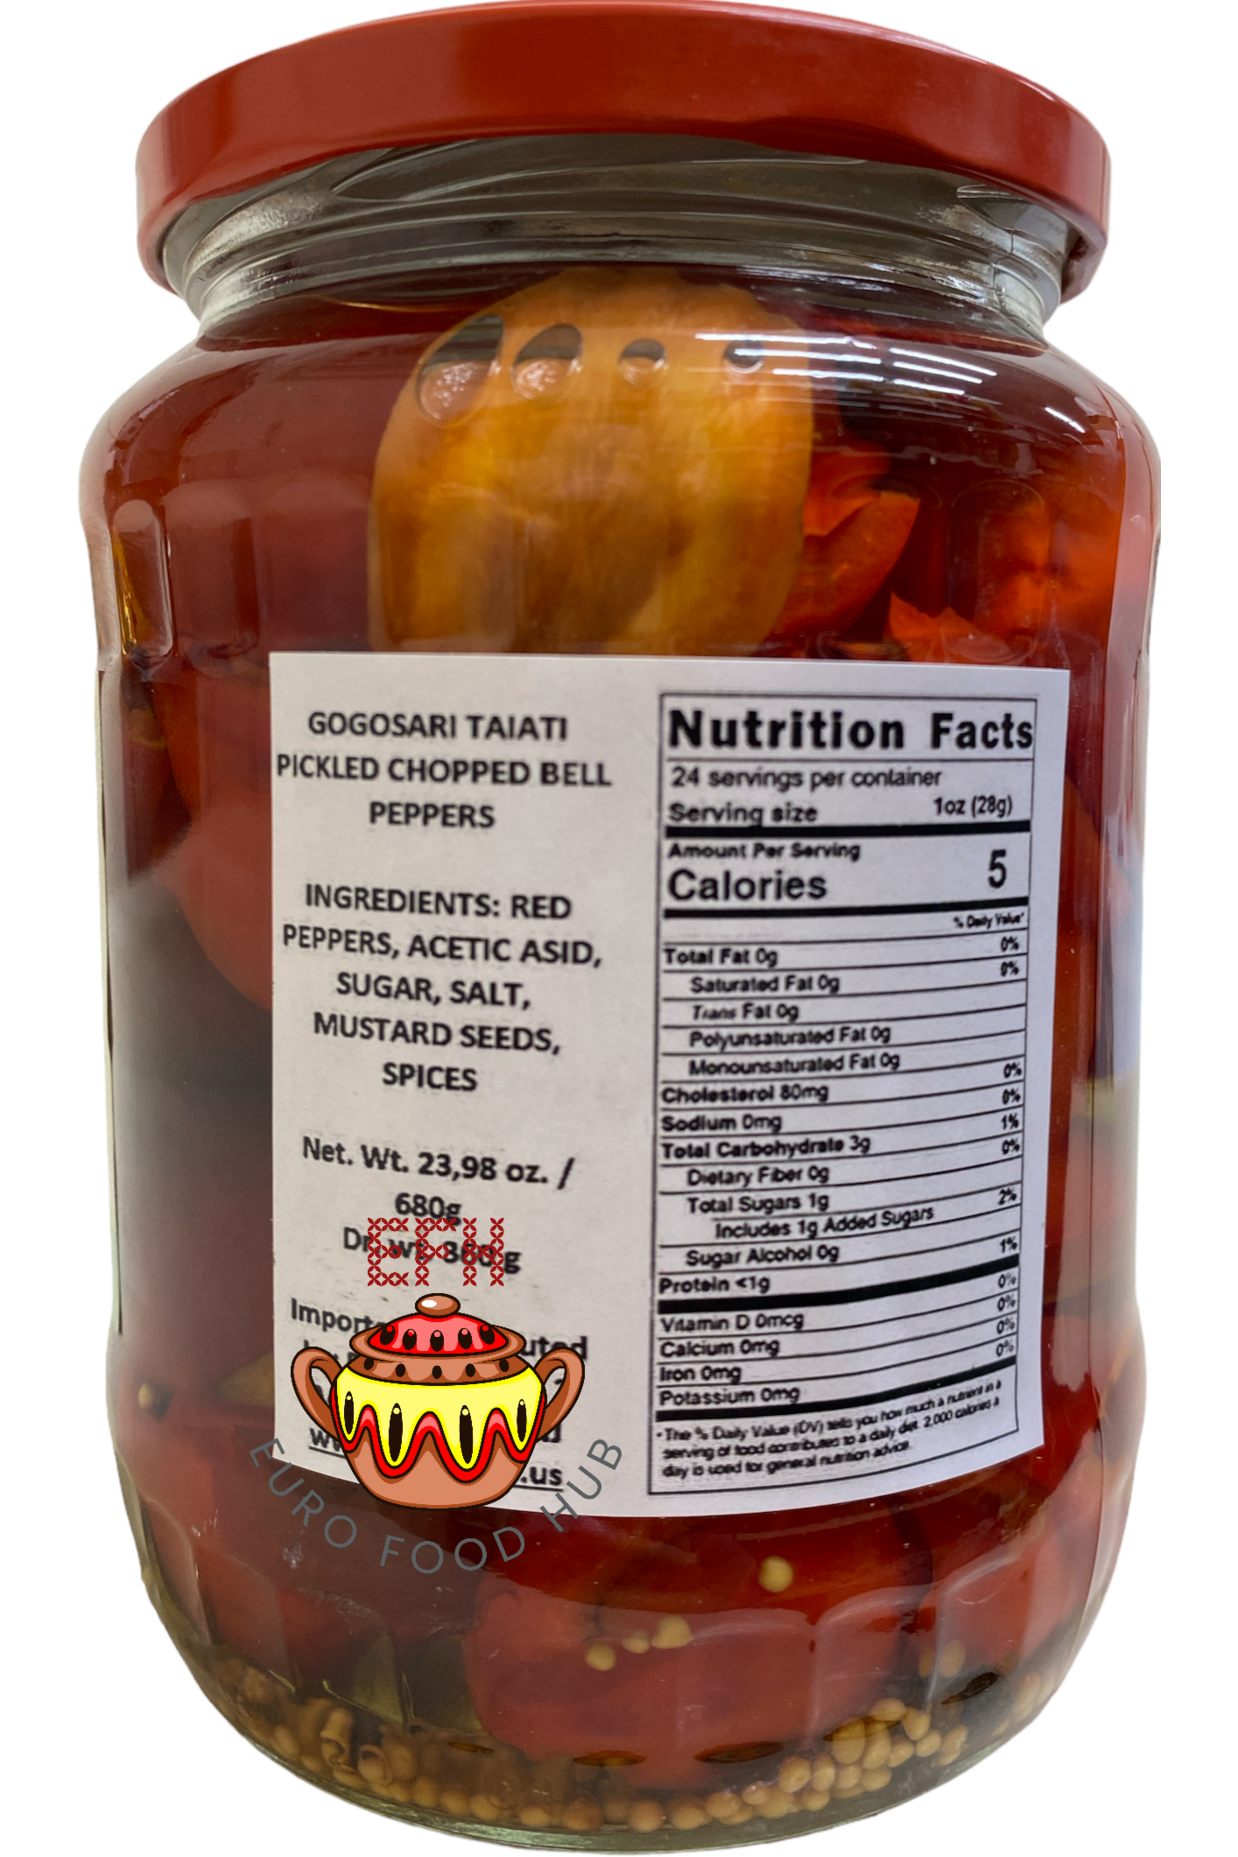 Pickled Chopped Bell Peppers - Conservfruct - GOGOSARI TAIATI 680g